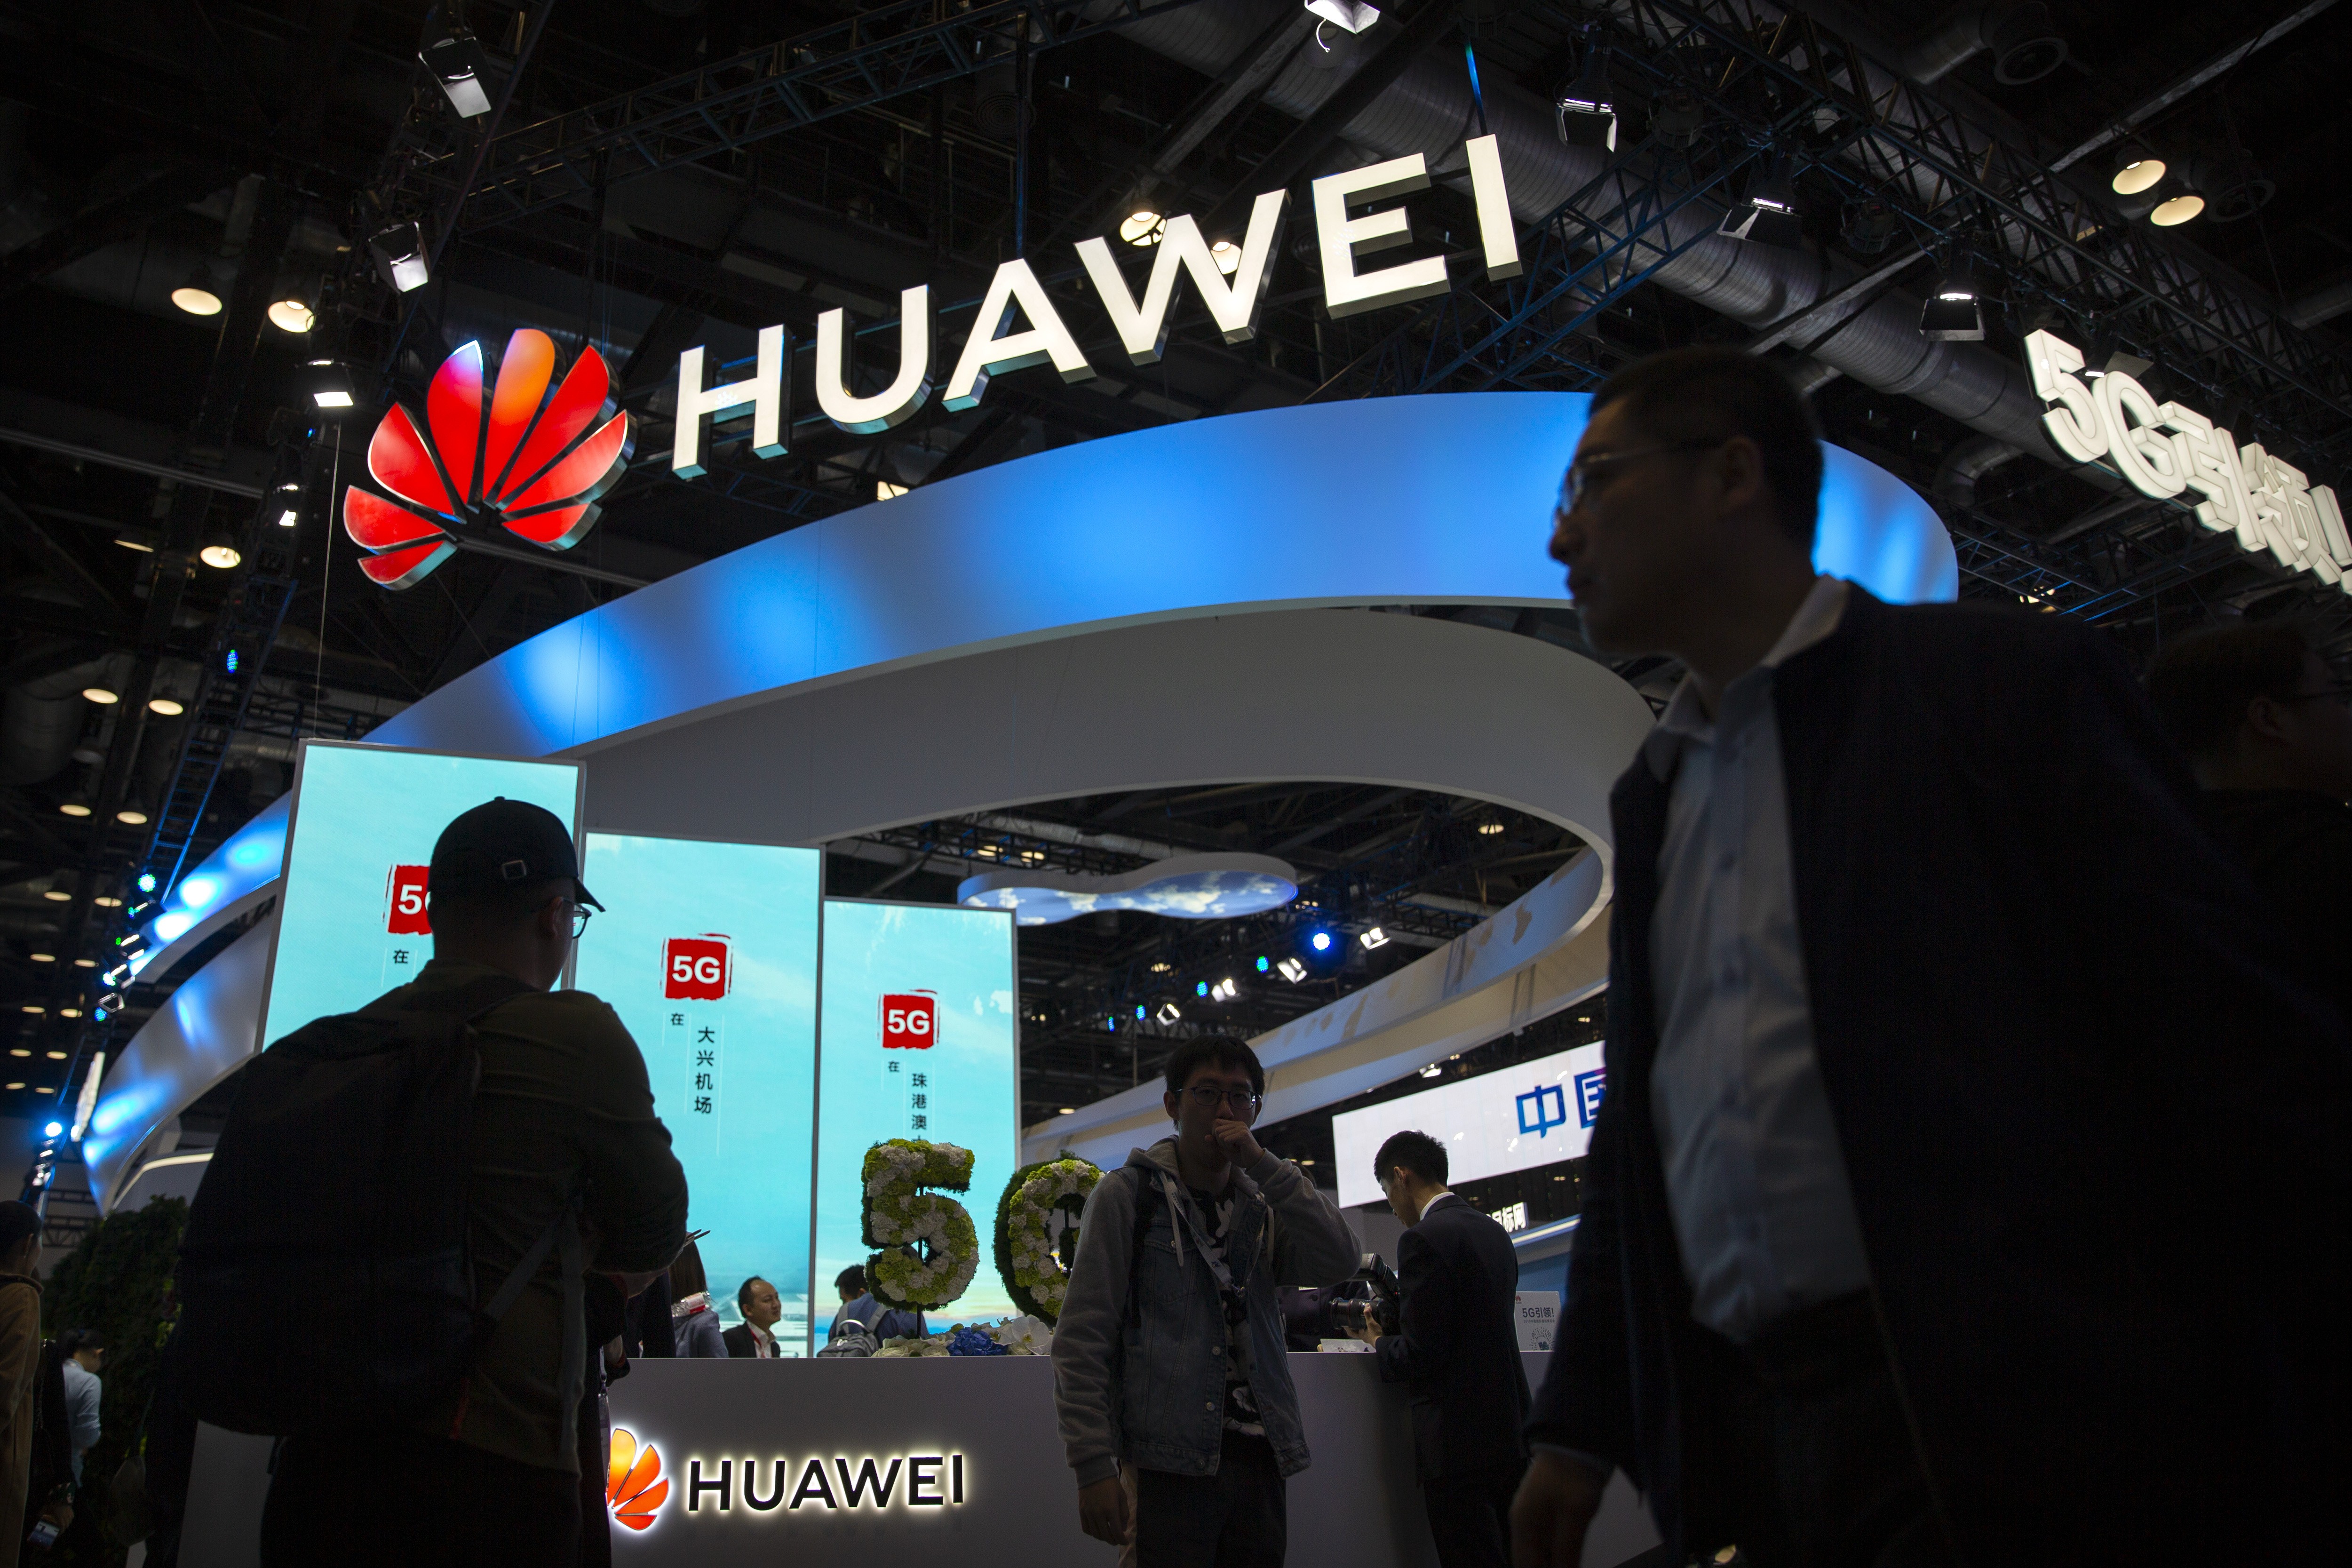 If the shelved plan had gone through, Huawei would have been among the largest companies ever added to the Treasury Department’s Specially Designated Nationals list. Photo: AP